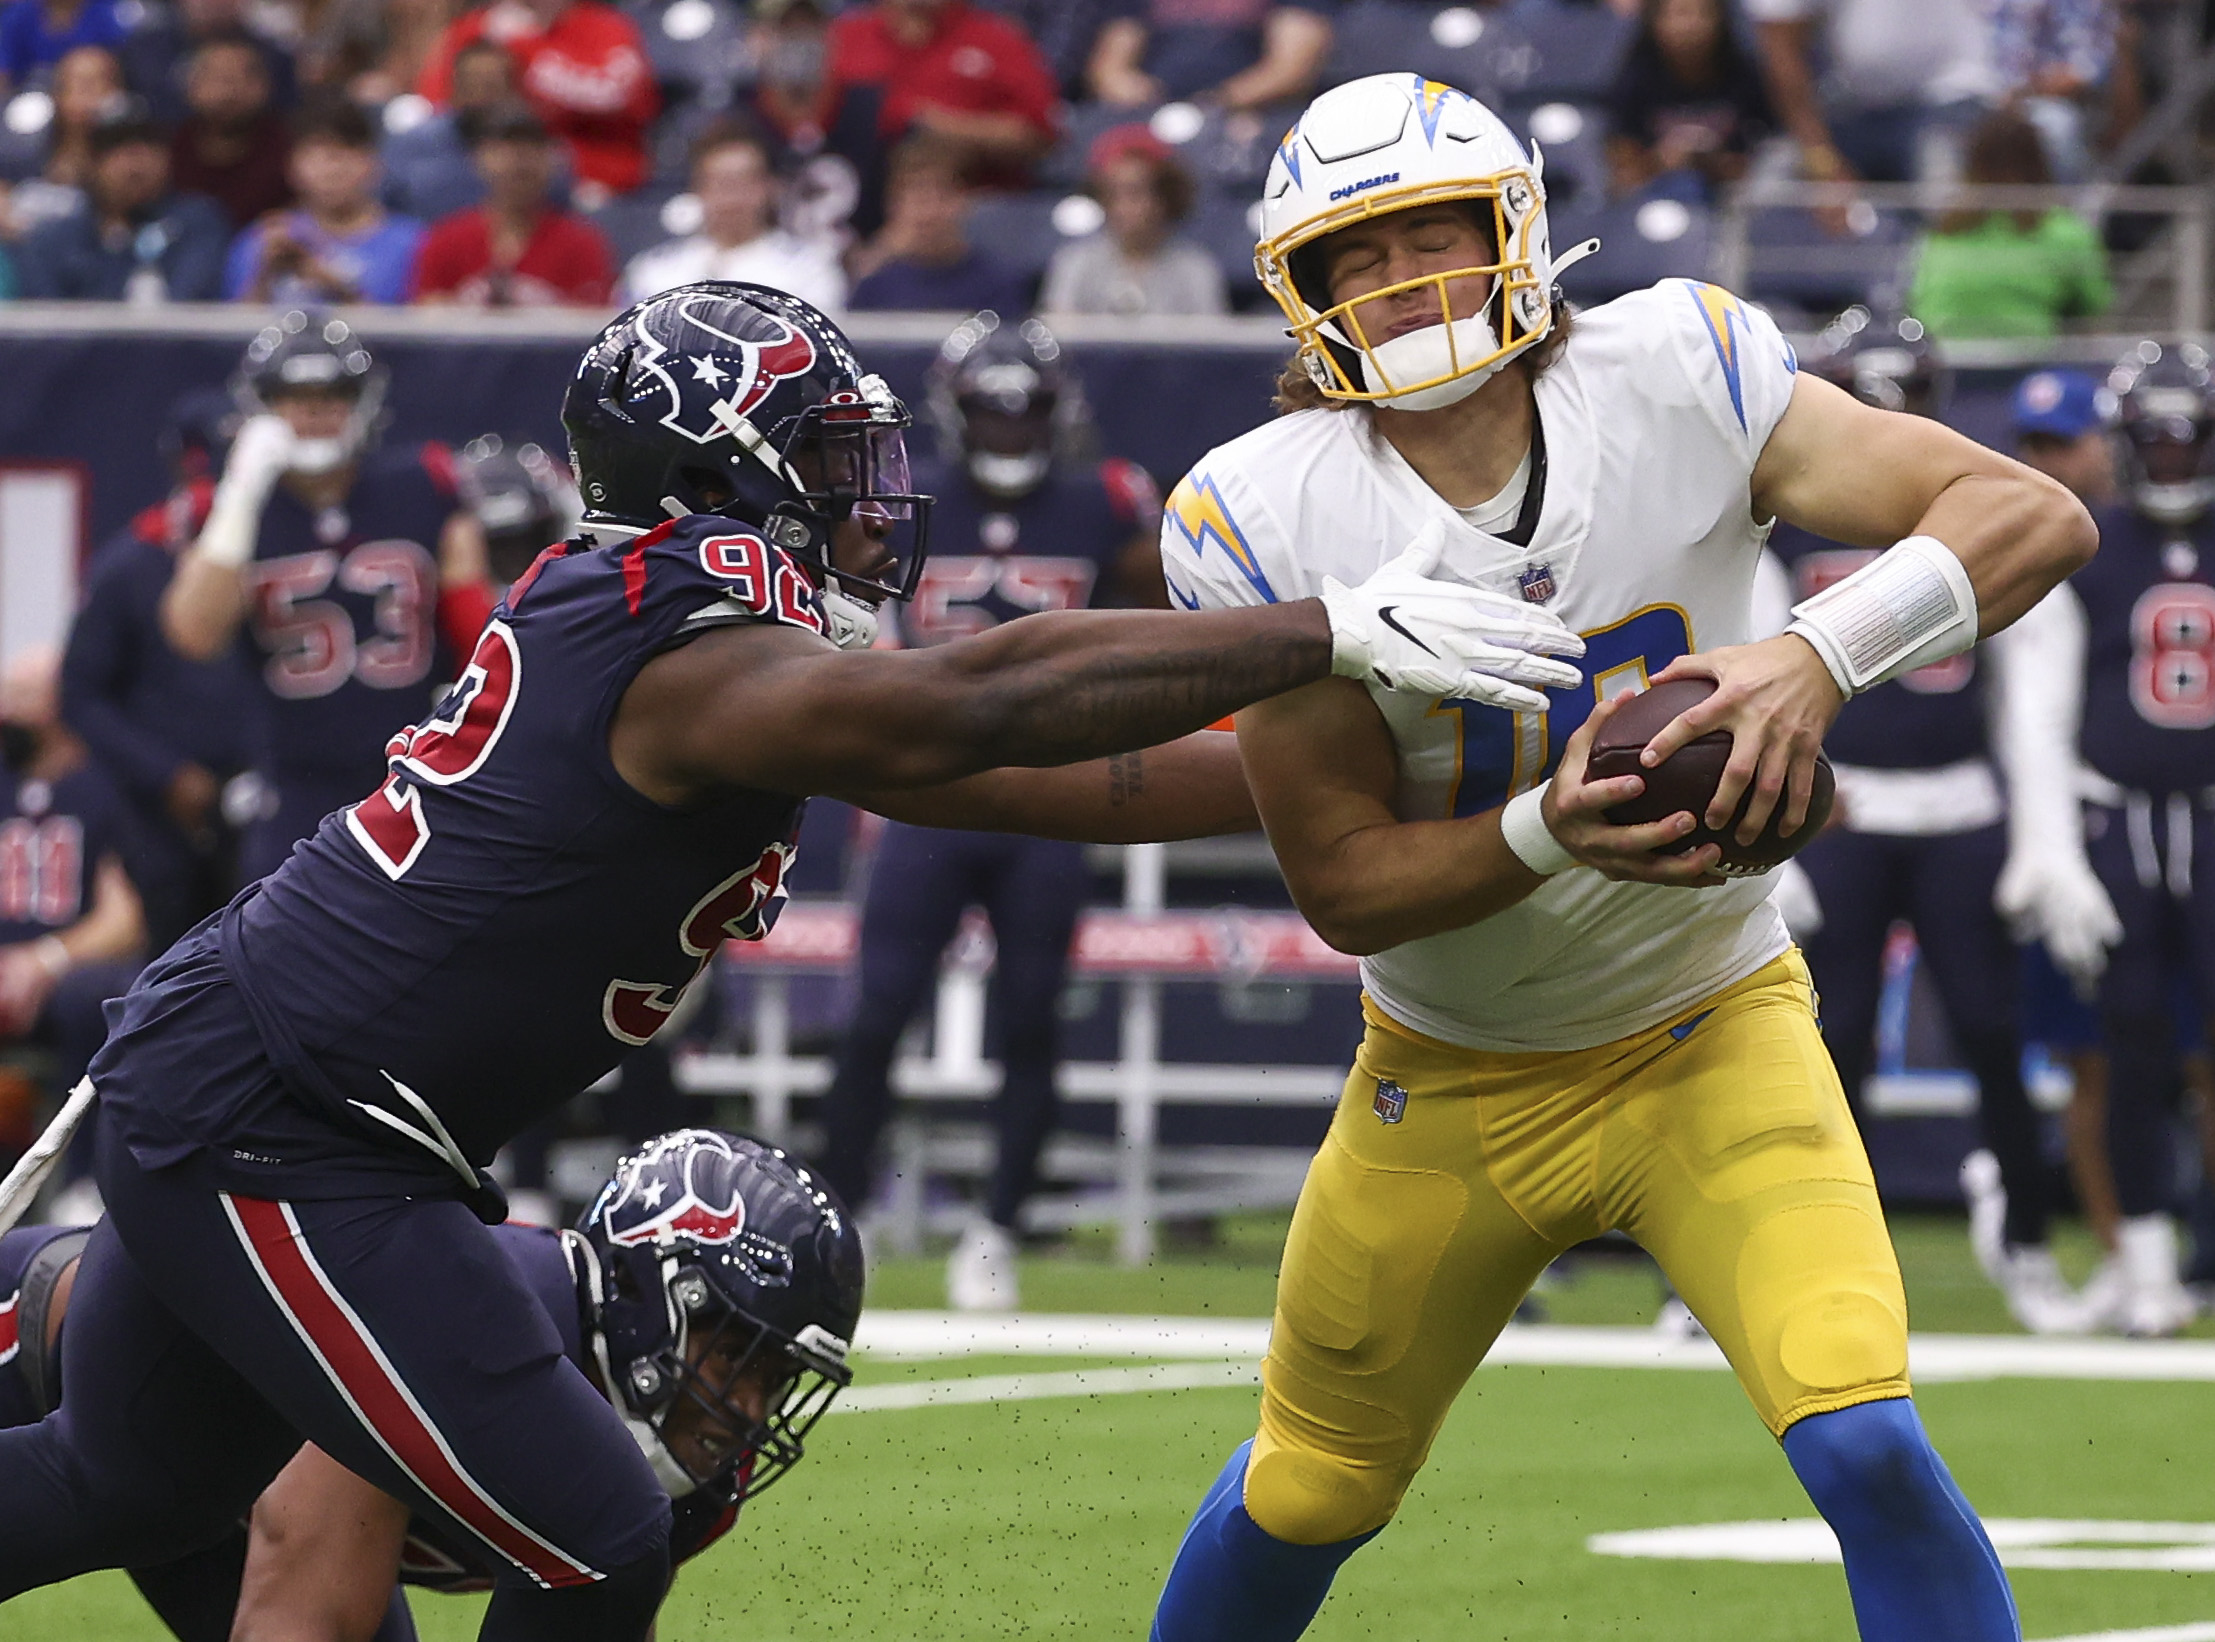 NFL: Los Angeles Chargers at Houston Texans